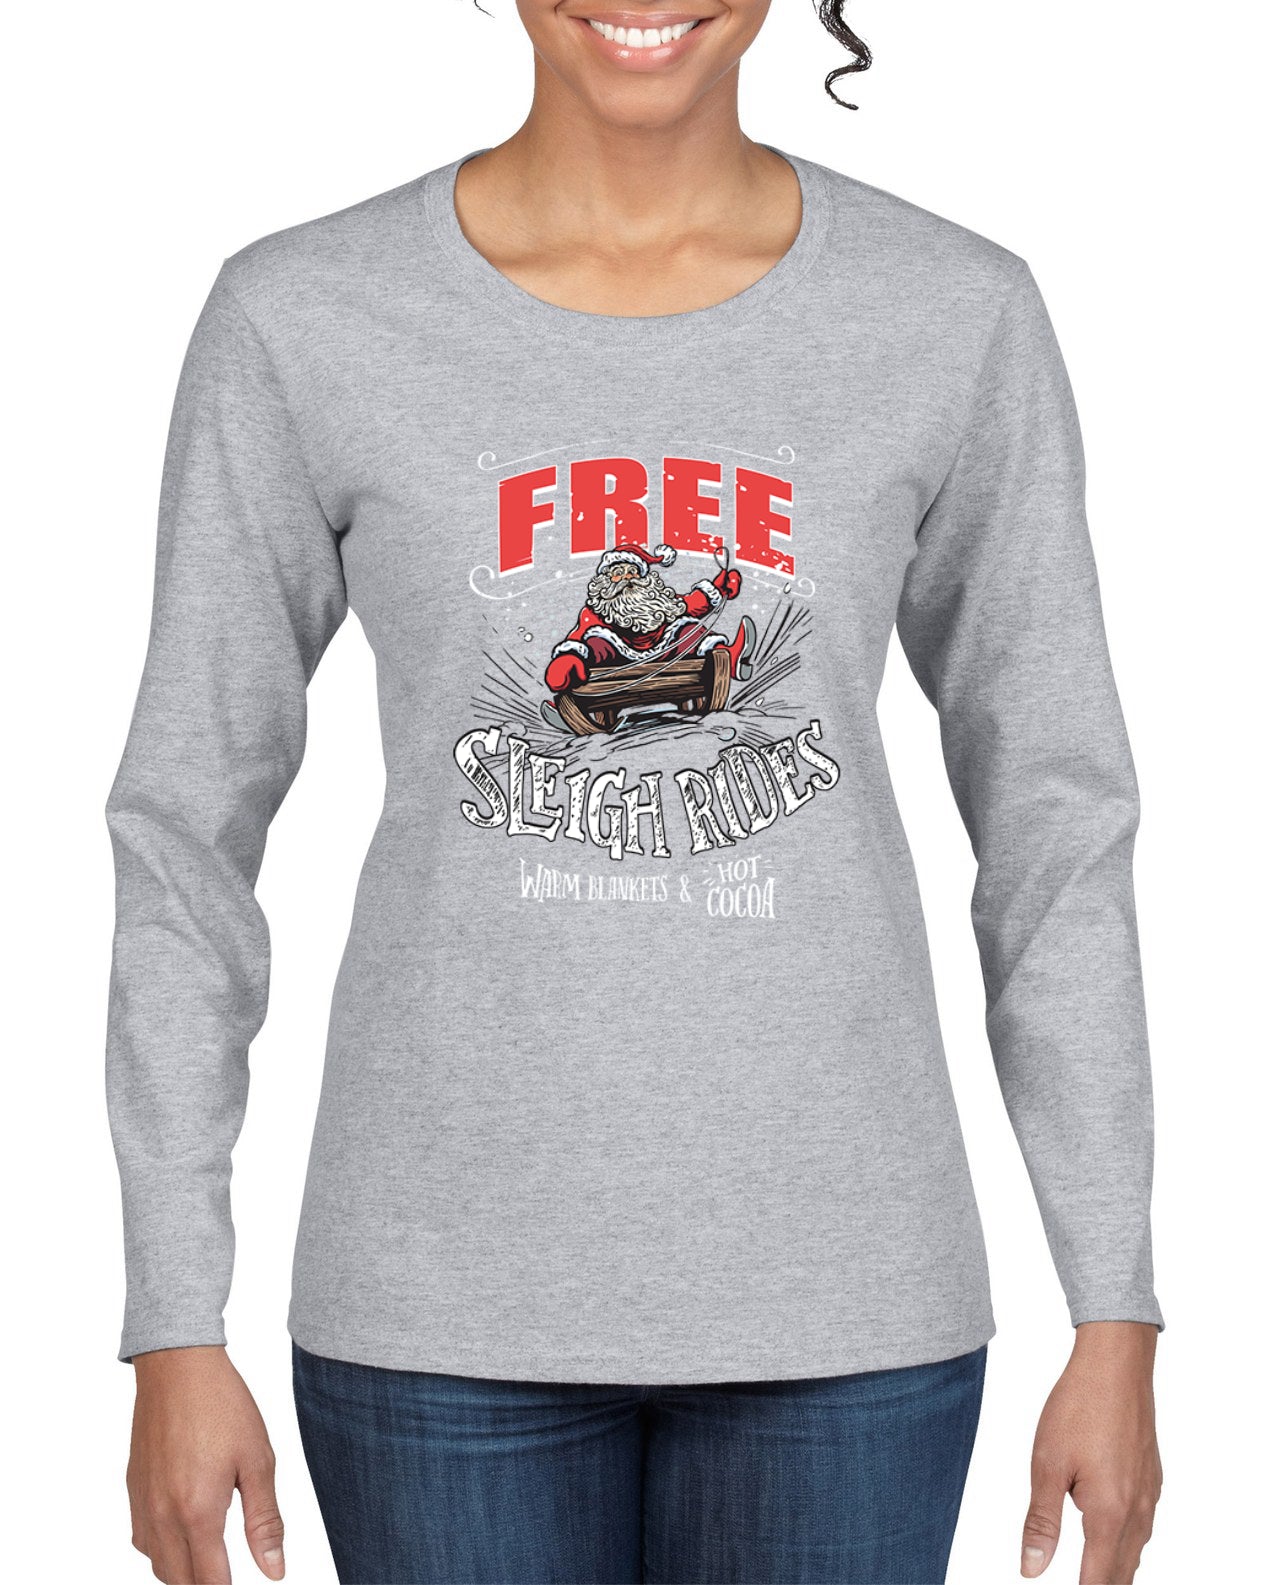 Free Sleigh Rides Warm Blankets & Hot Cocoa Christmas Womens Graphic Long Sleeve T-Shirt